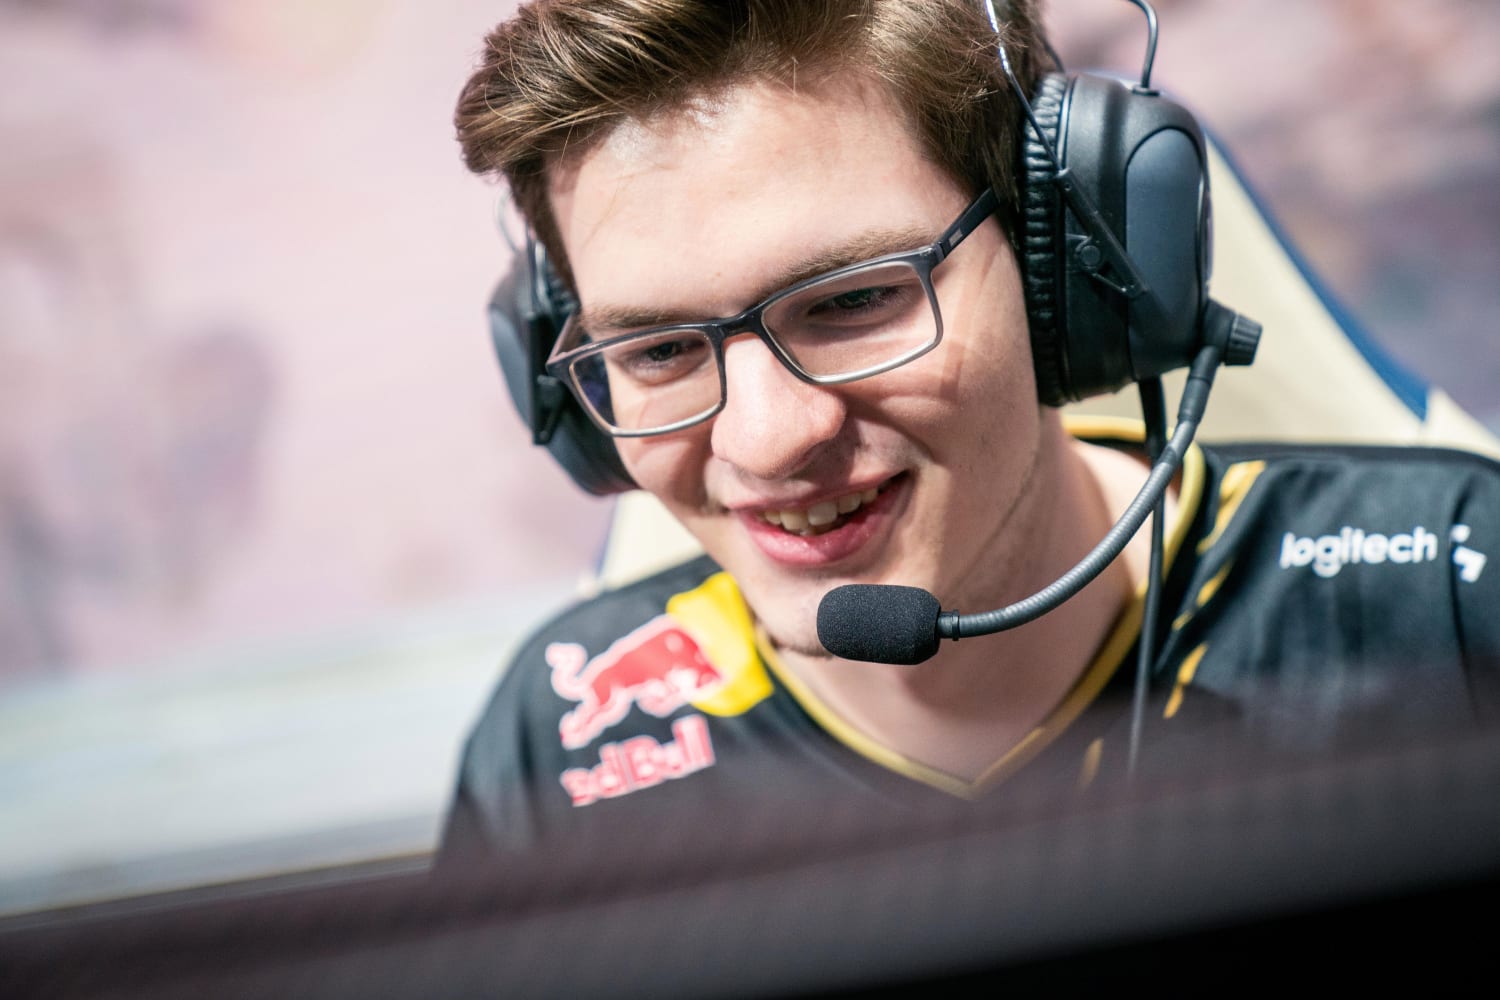 G2's Mikyx: I'm the second best support in the world